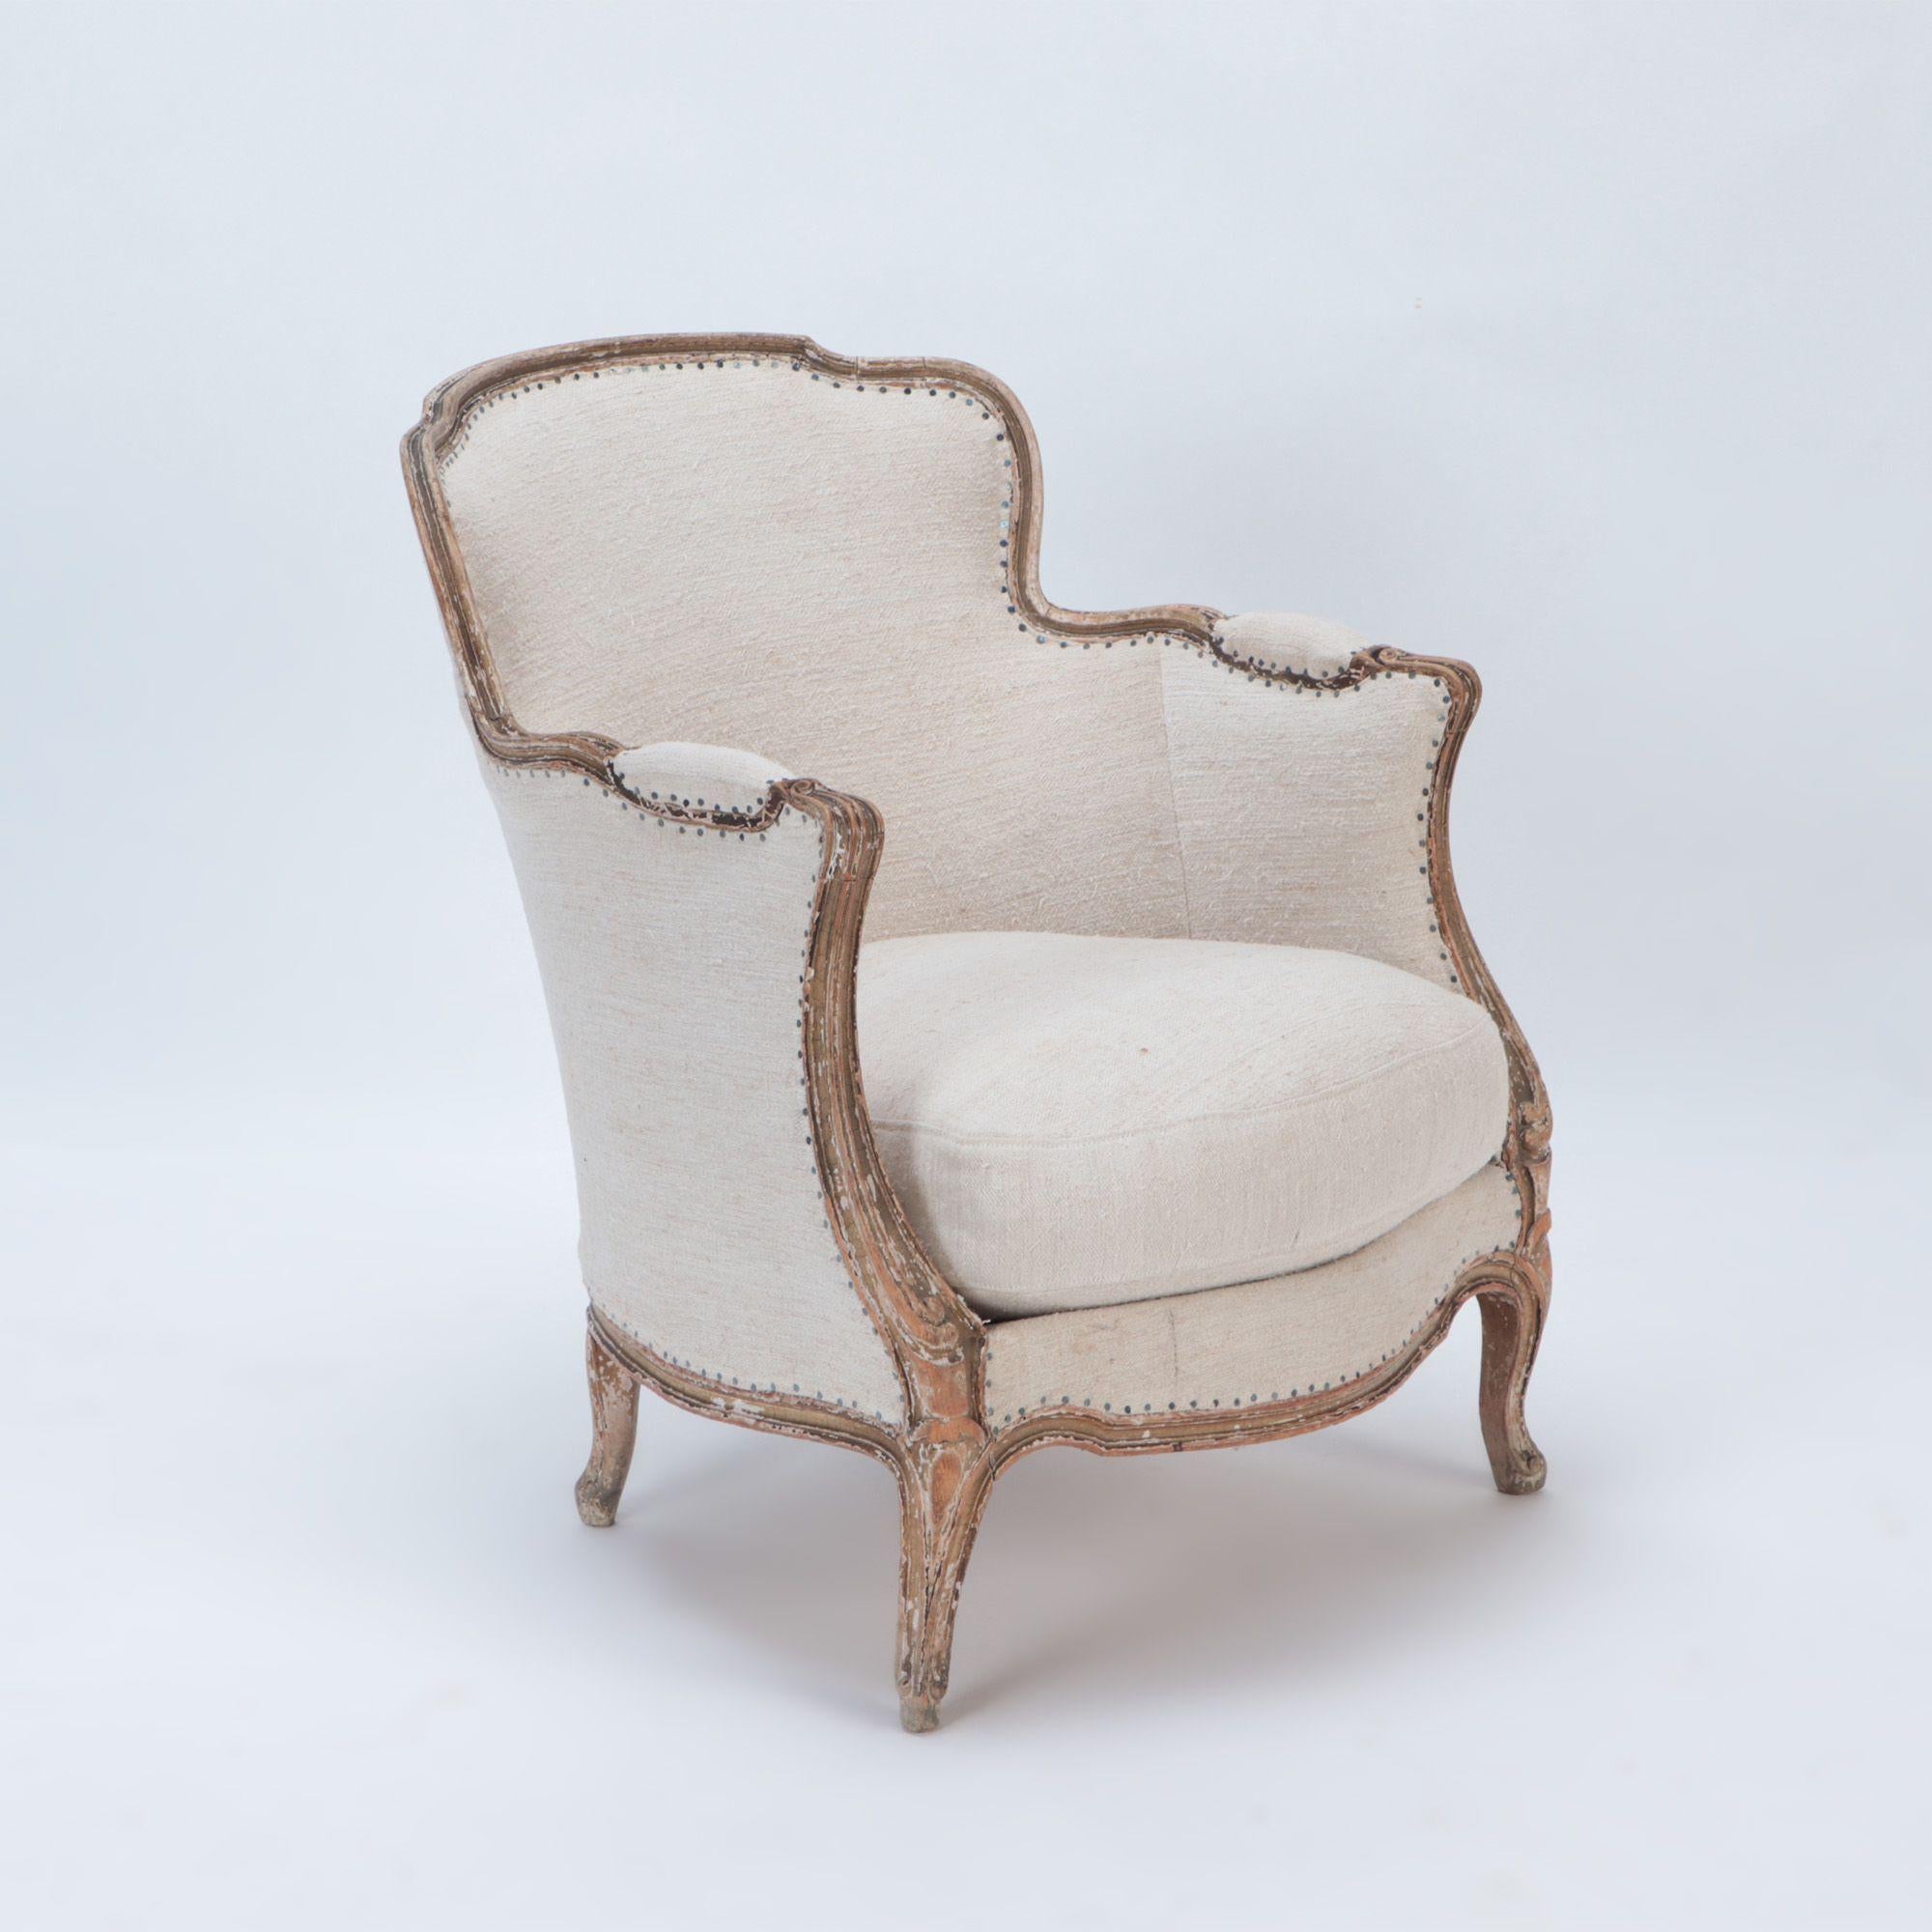 Early 20th Century French Louis XV Style Armchair and Ottoman, circa 1910